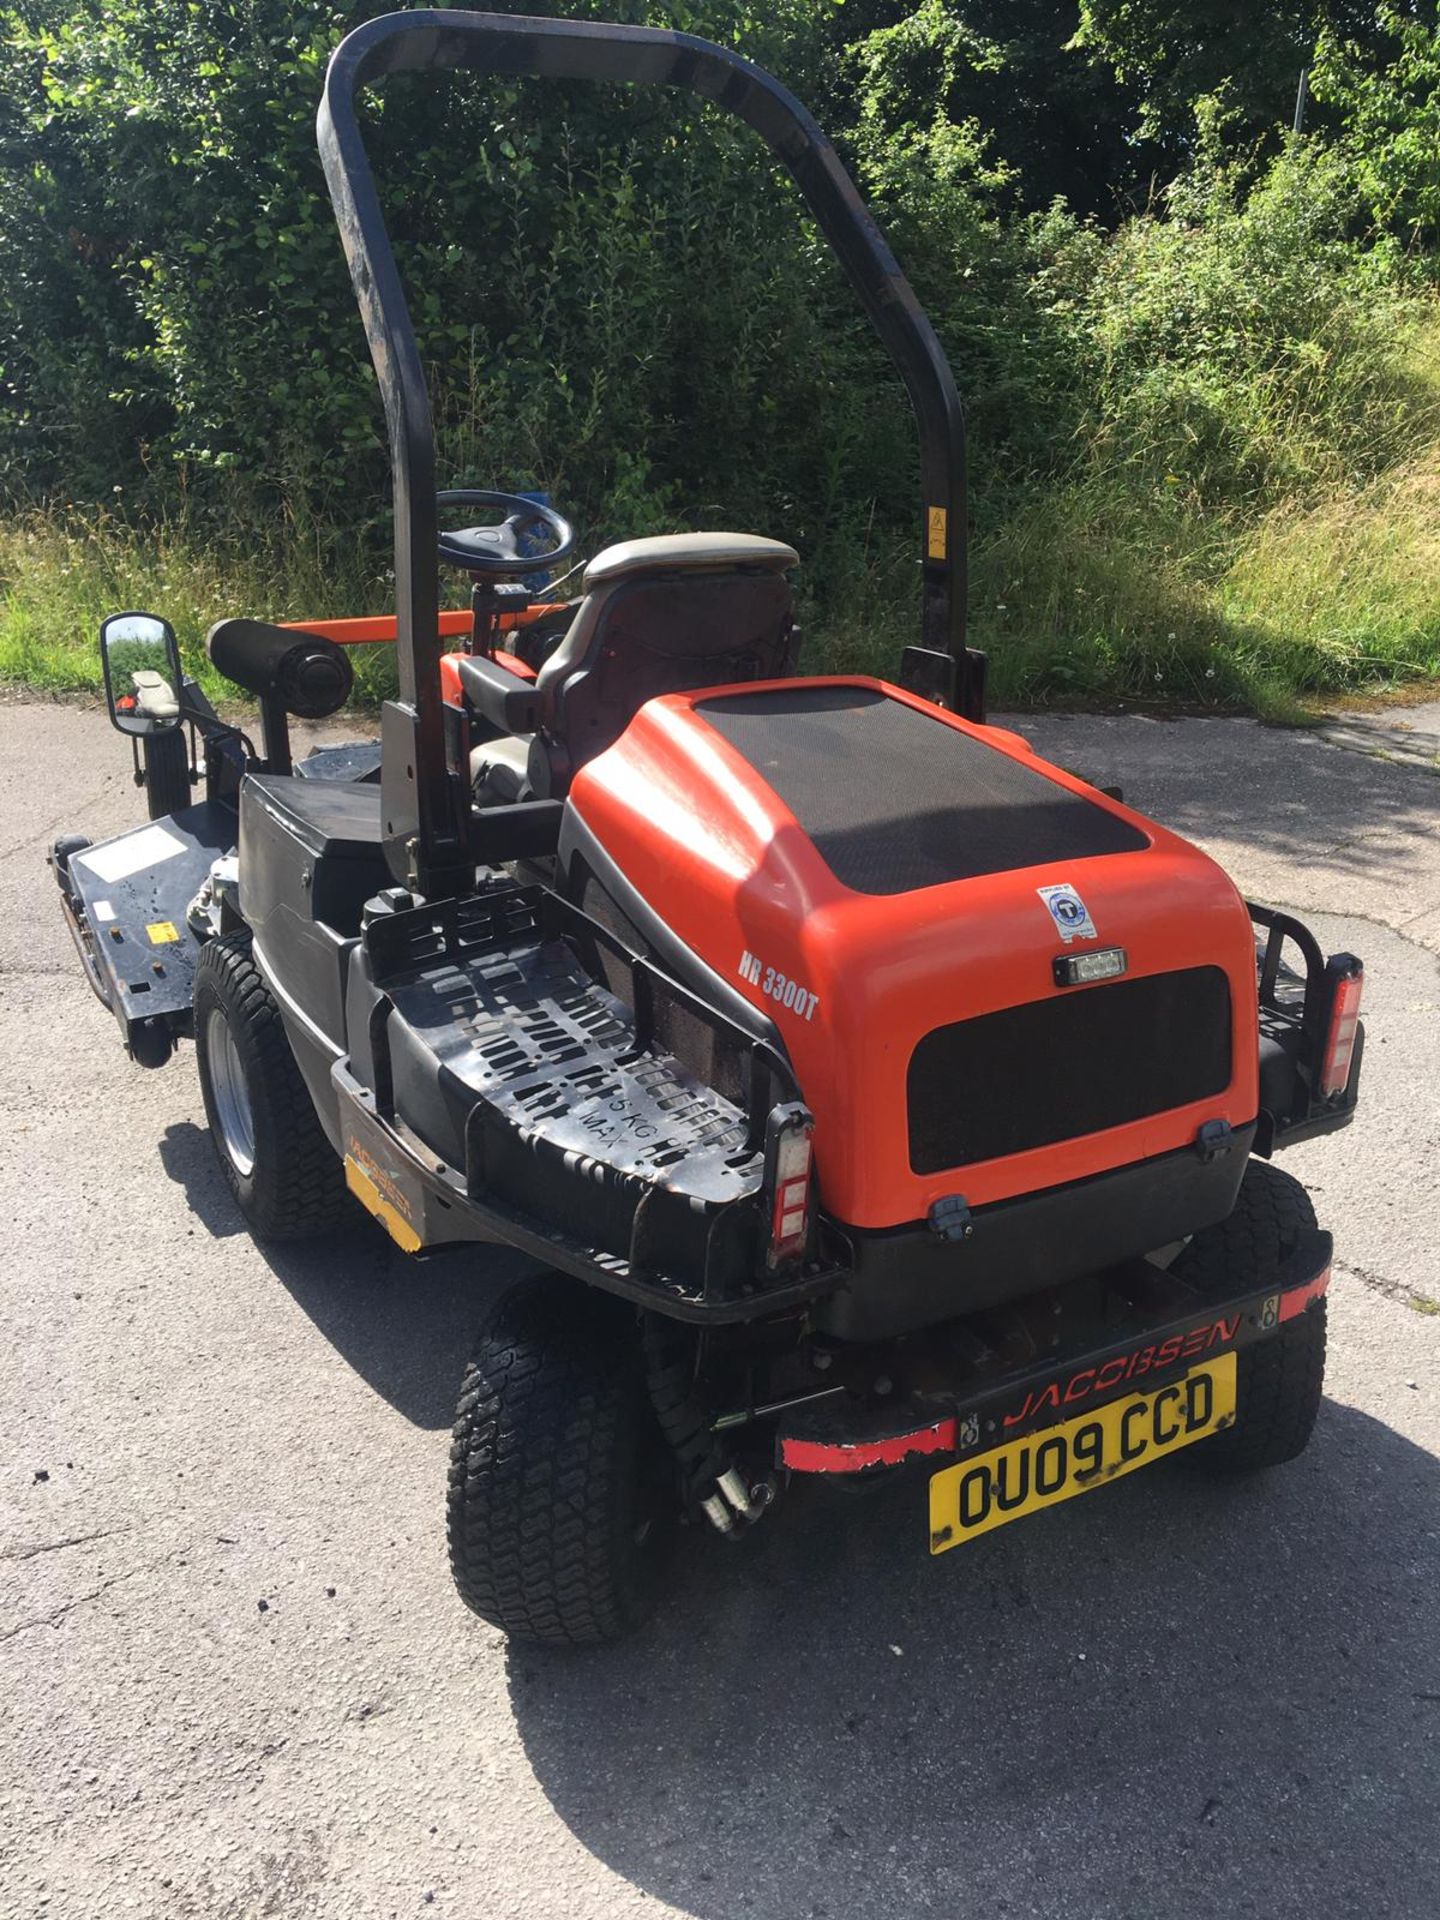 2009/09 REG RANSOMES JACOBSEN HR3300T OUTFRONT ROTARY DIESEL RIDE ON LAWN MOWER C/W ROLL BAR *NO VAT - Image 5 of 16